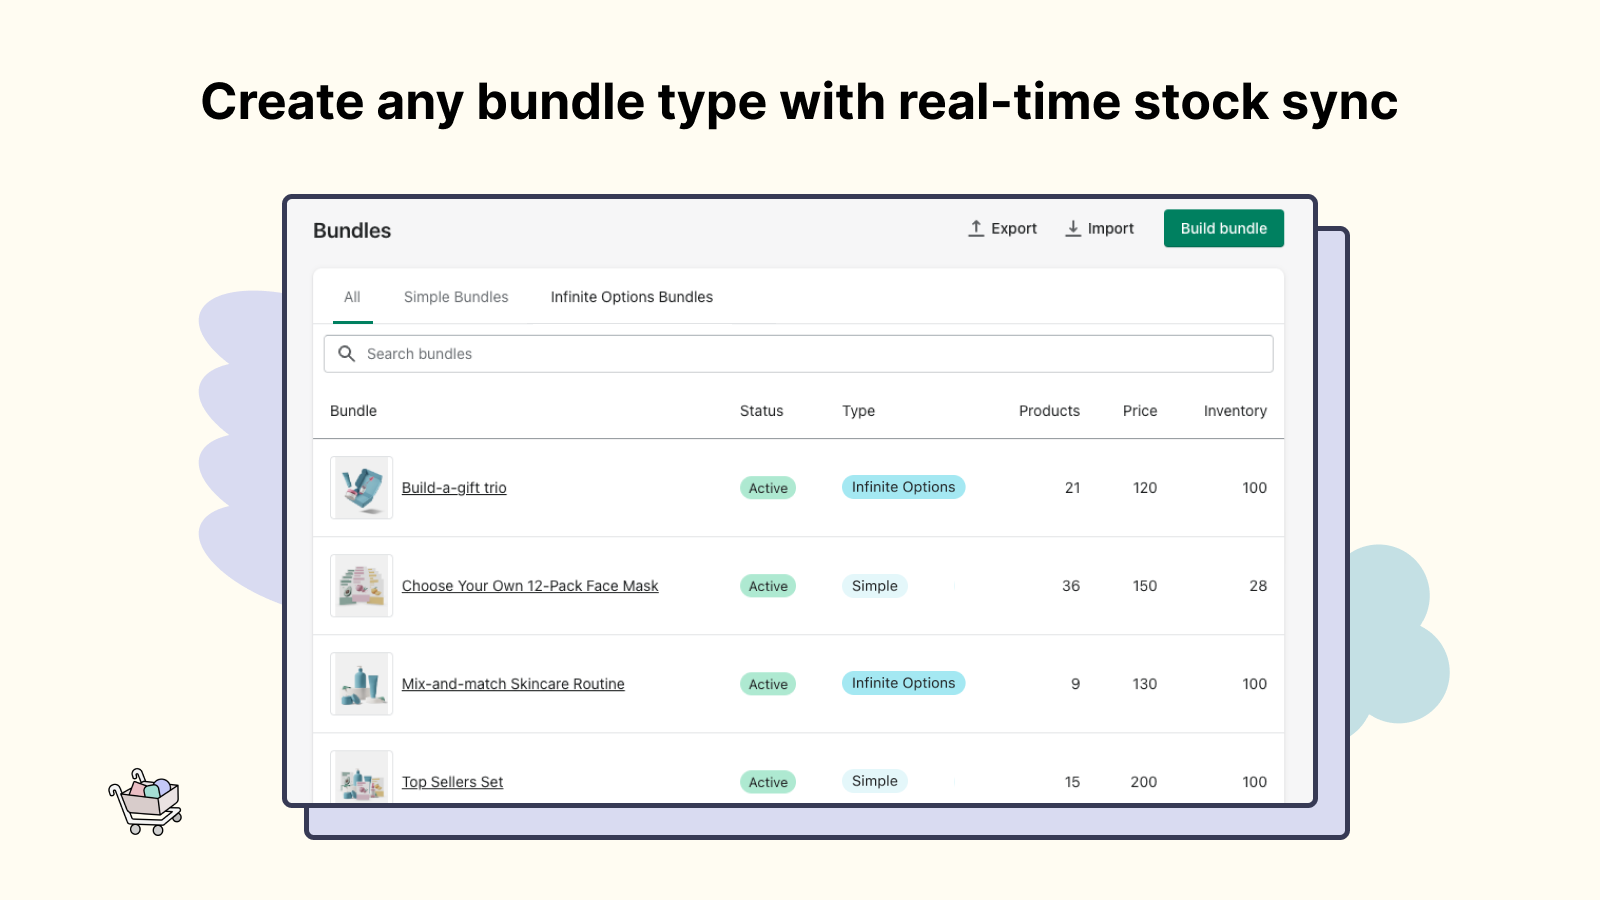 Create any bundle type with real-time stock sync